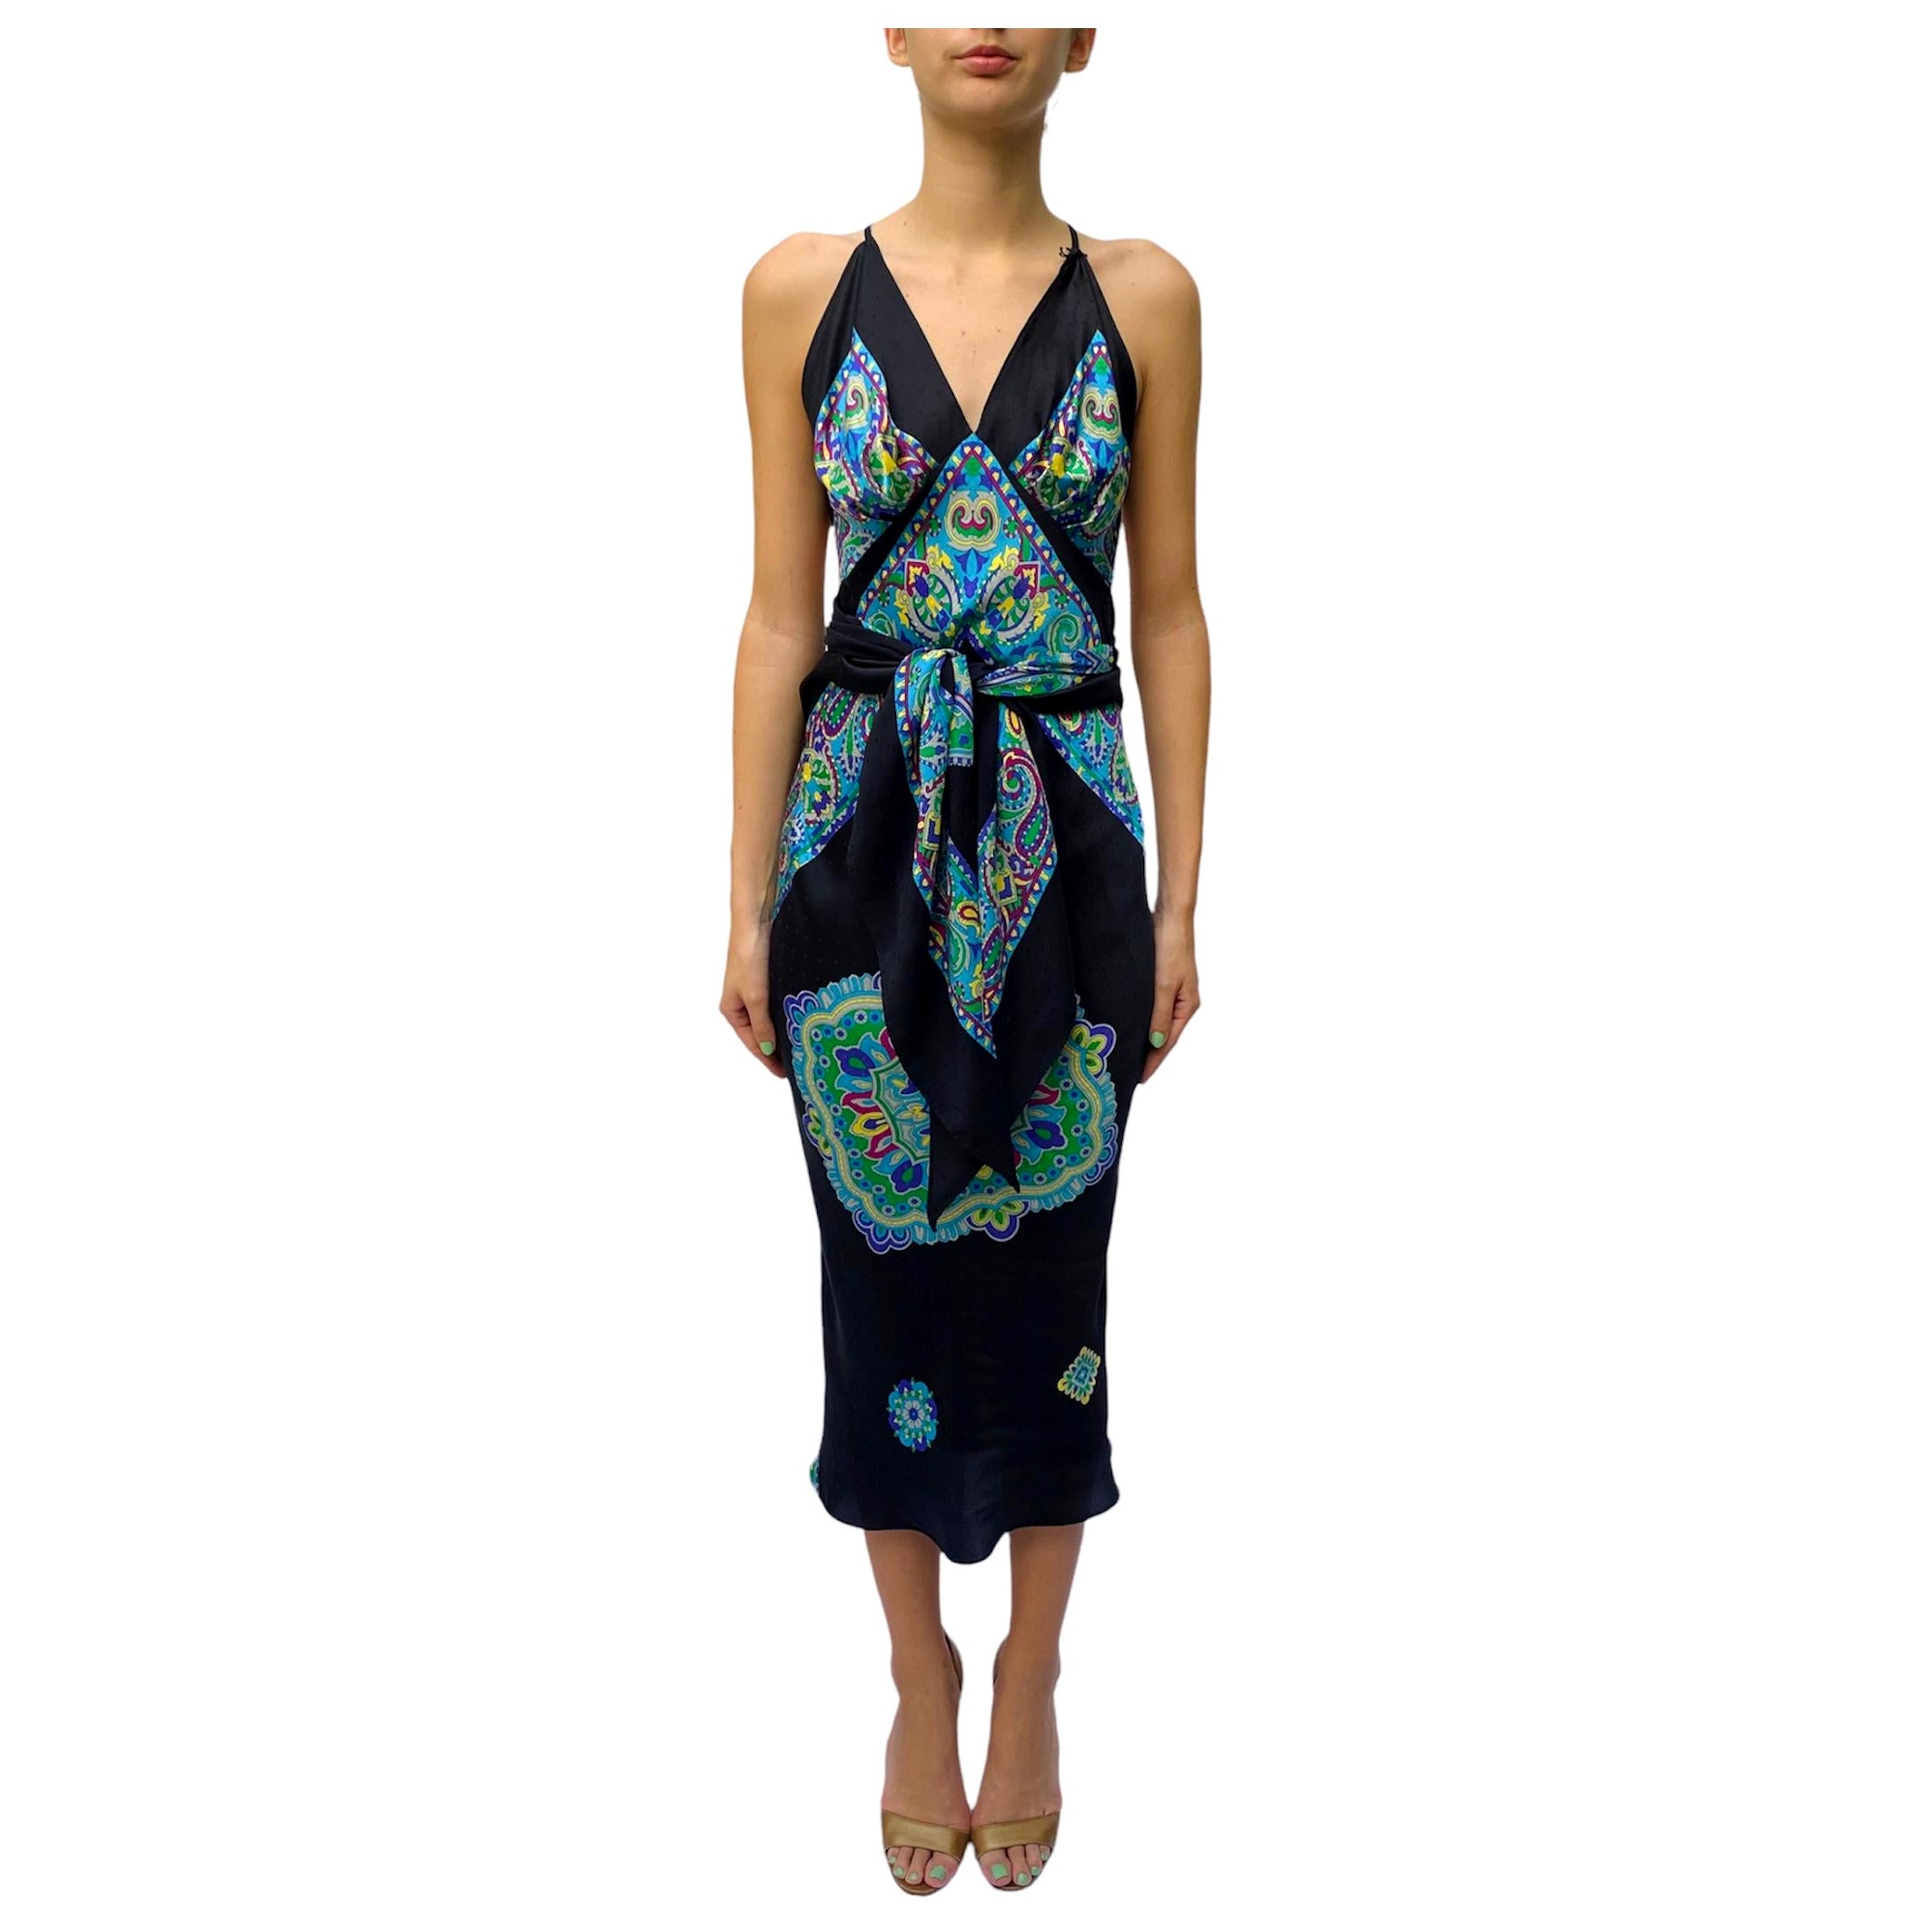 Morphew Collection Black & Blue Multicolored Silk Twill Print Scarf Dress Made 